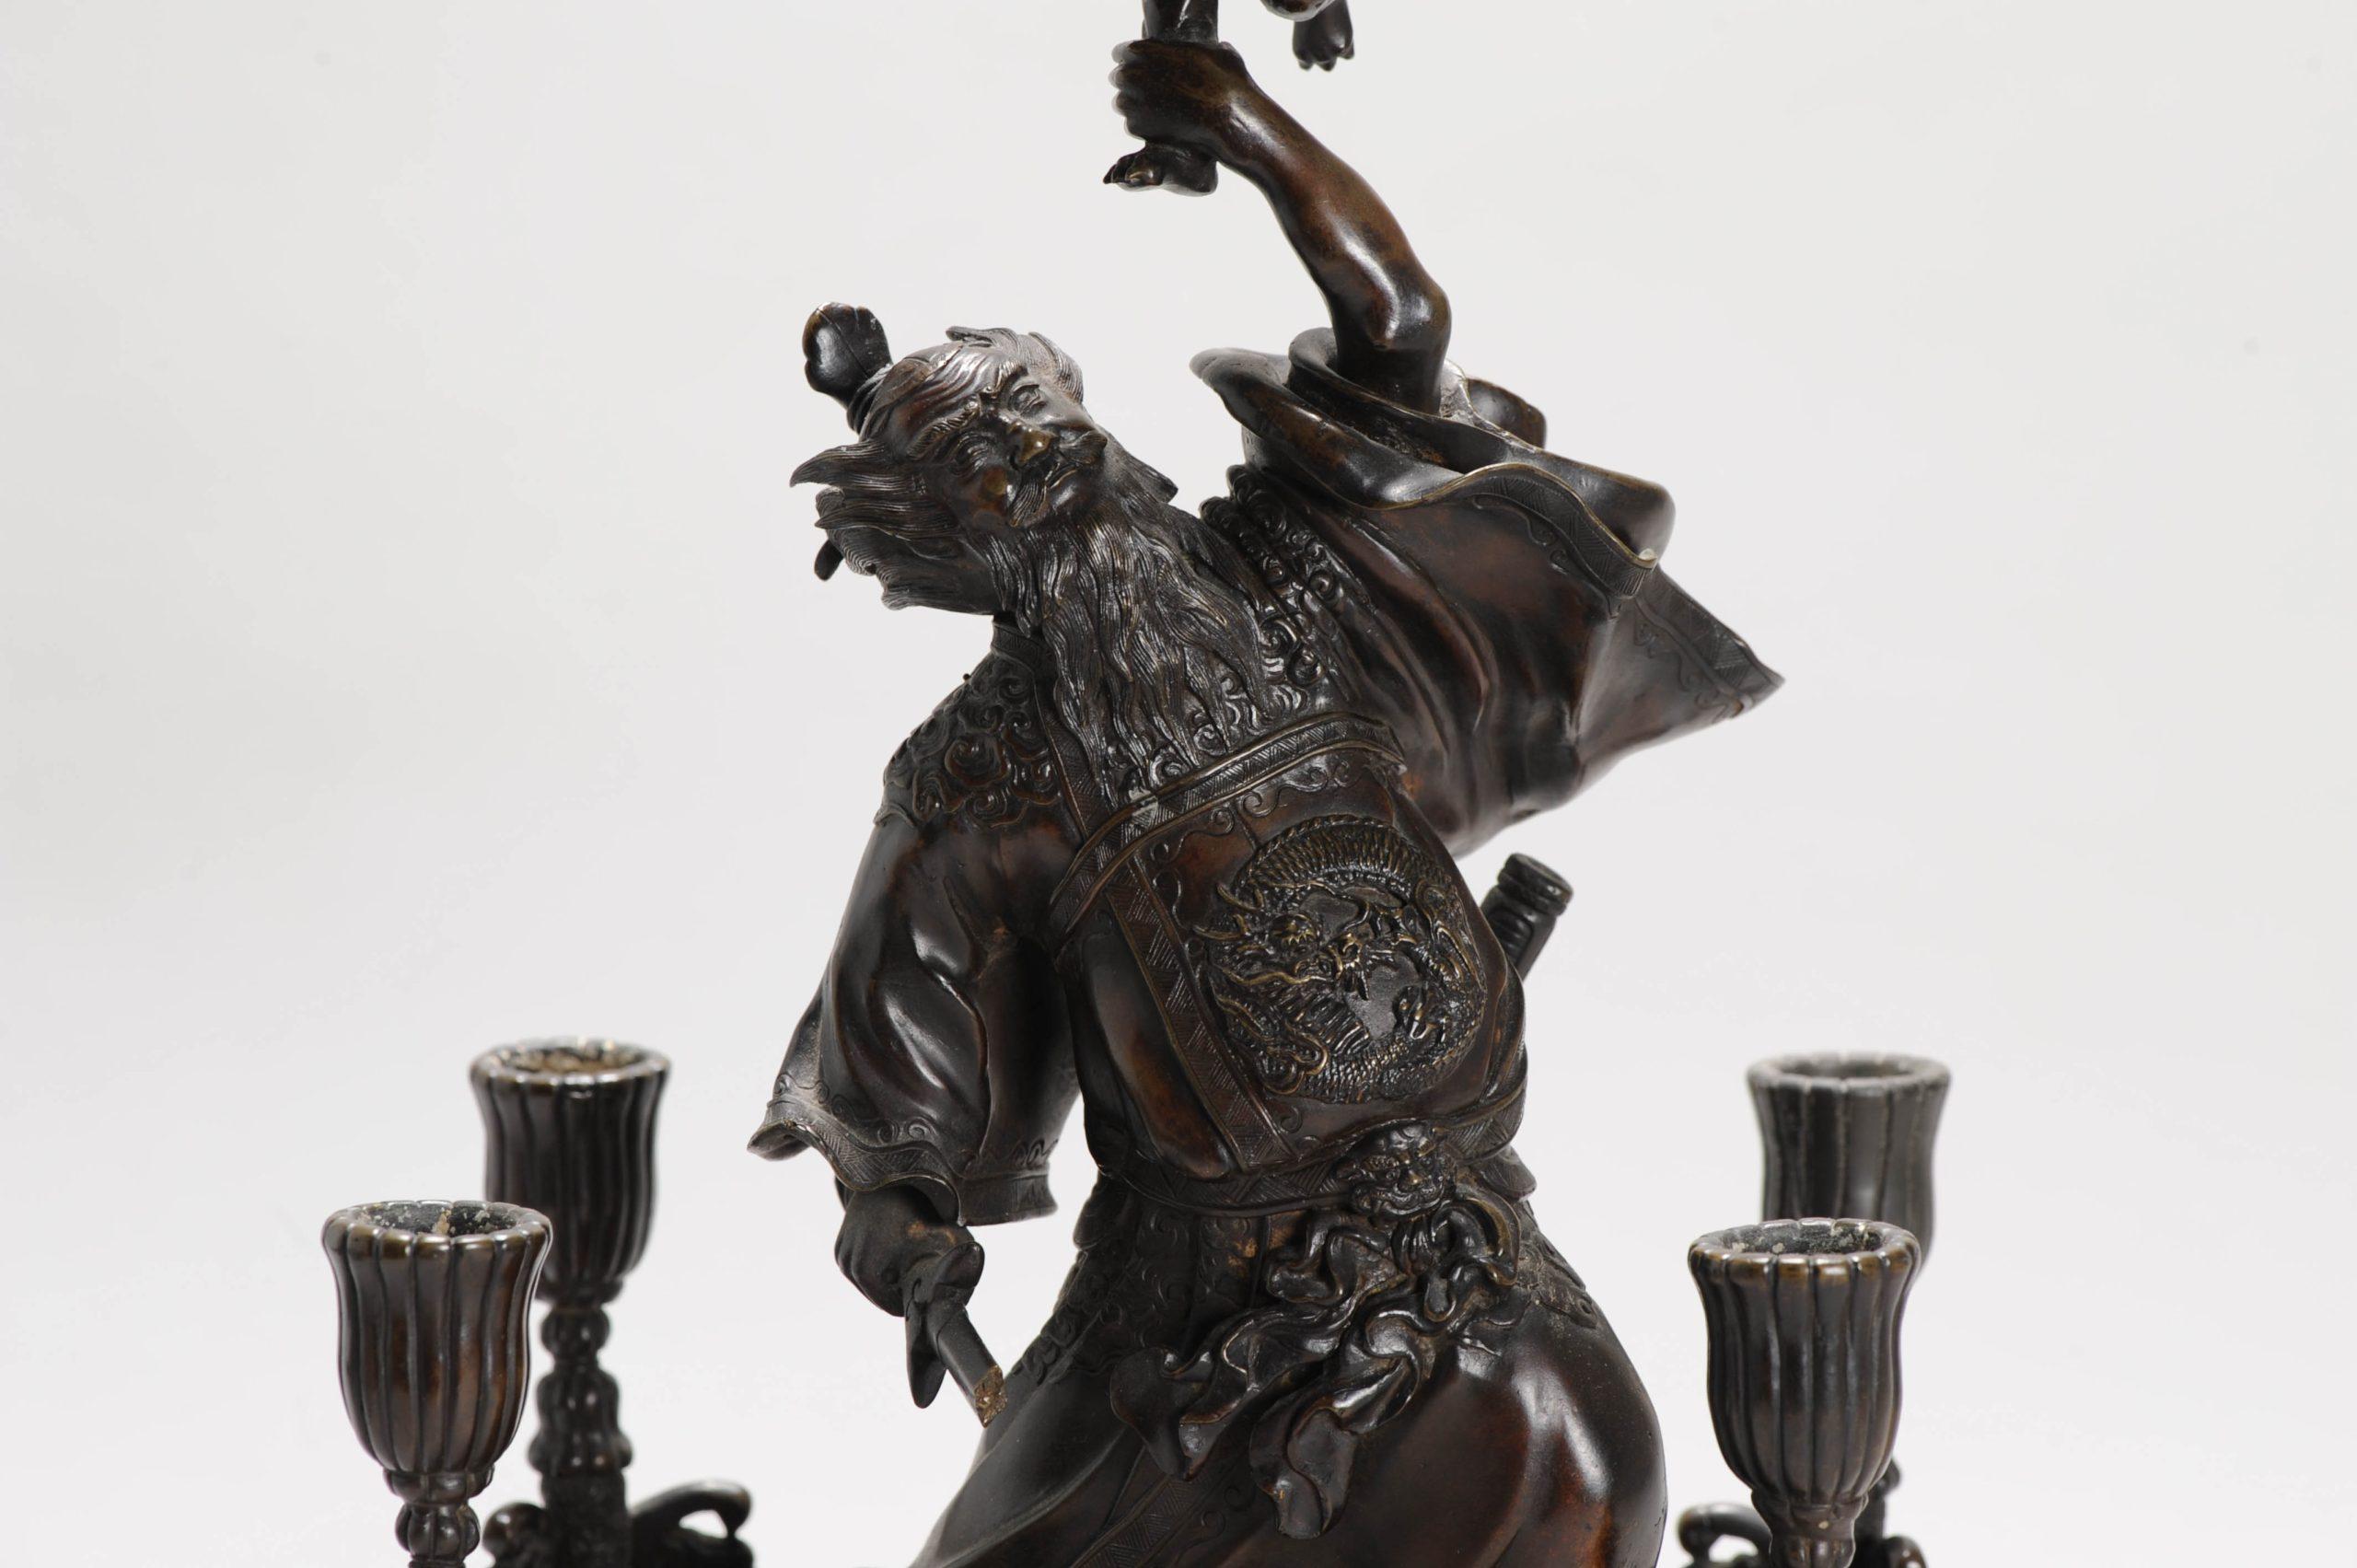 

BRONZE top level Chinese statue/candle holder. Depicting Zhongkui and Child.

Besides being a vanquisher of evil, Zhong Kui has the power to bring good fortune. He is associated with auspicious symbols of Chinese iconography, for example bats or